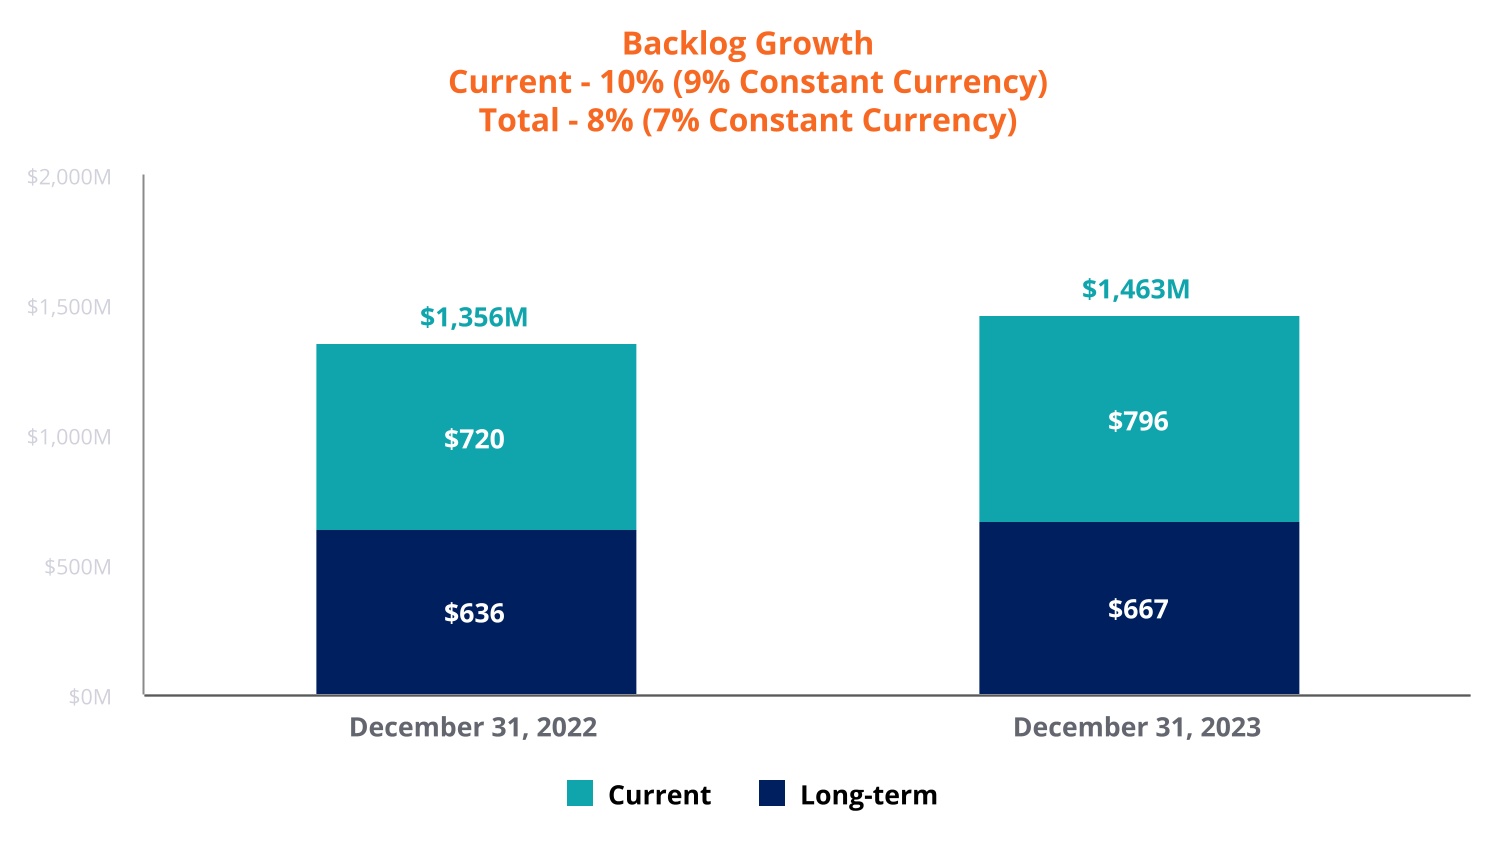 Backlog_Growth_Current_-_10%_(9%_Constant_Currency)_Total_-_8%_(7%_Constant_Currency).jpg